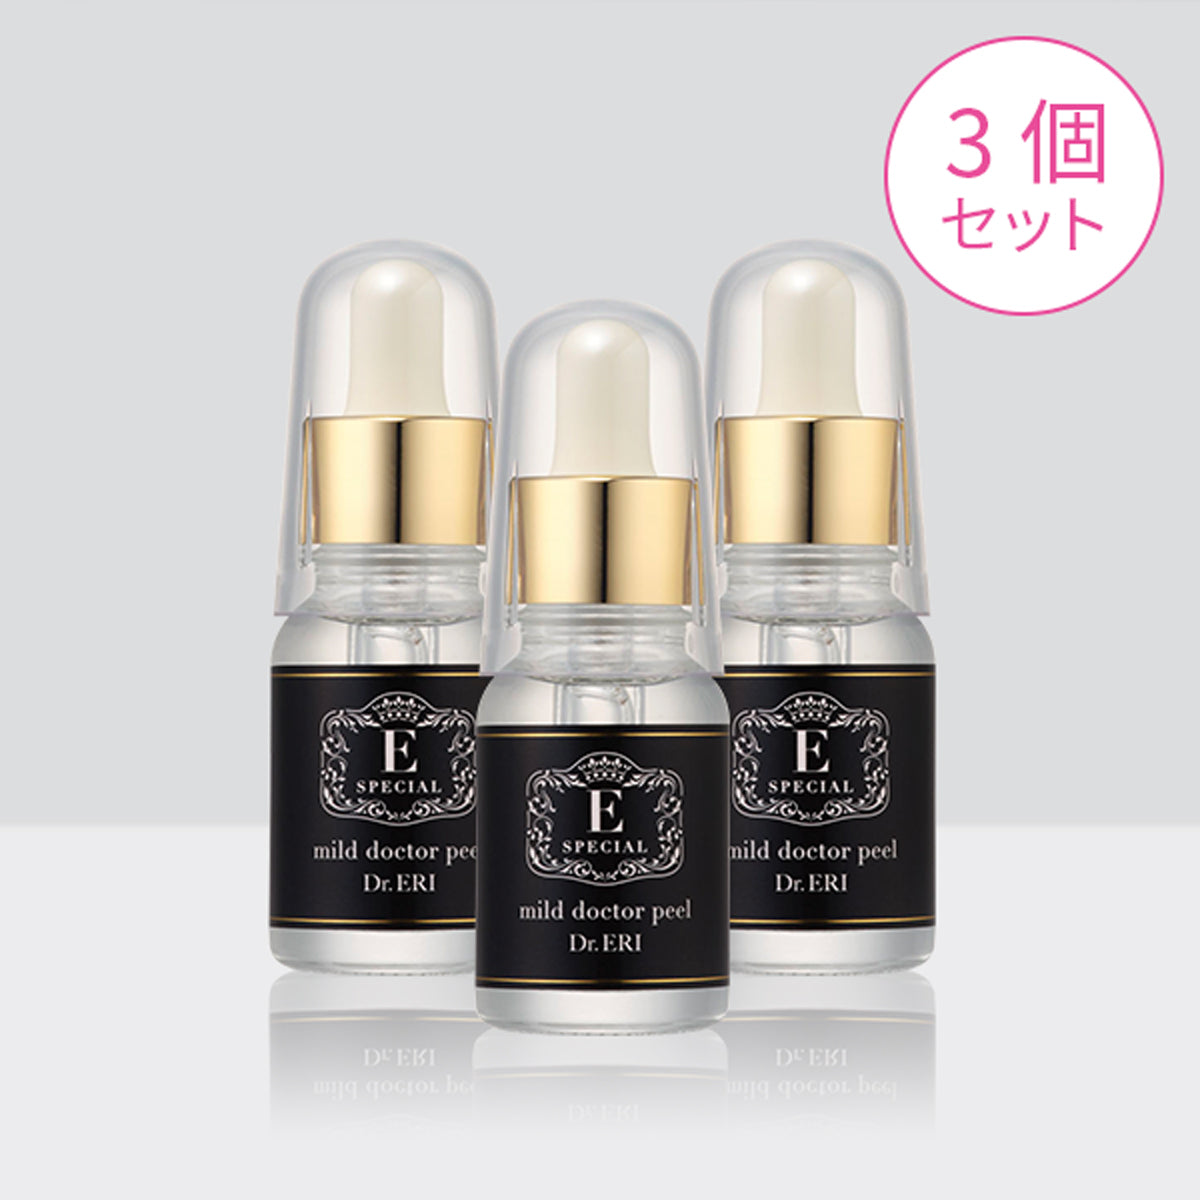 3 sets E-Special Skin Clear Serum <Mild Doctor Peel> 20ml x 3